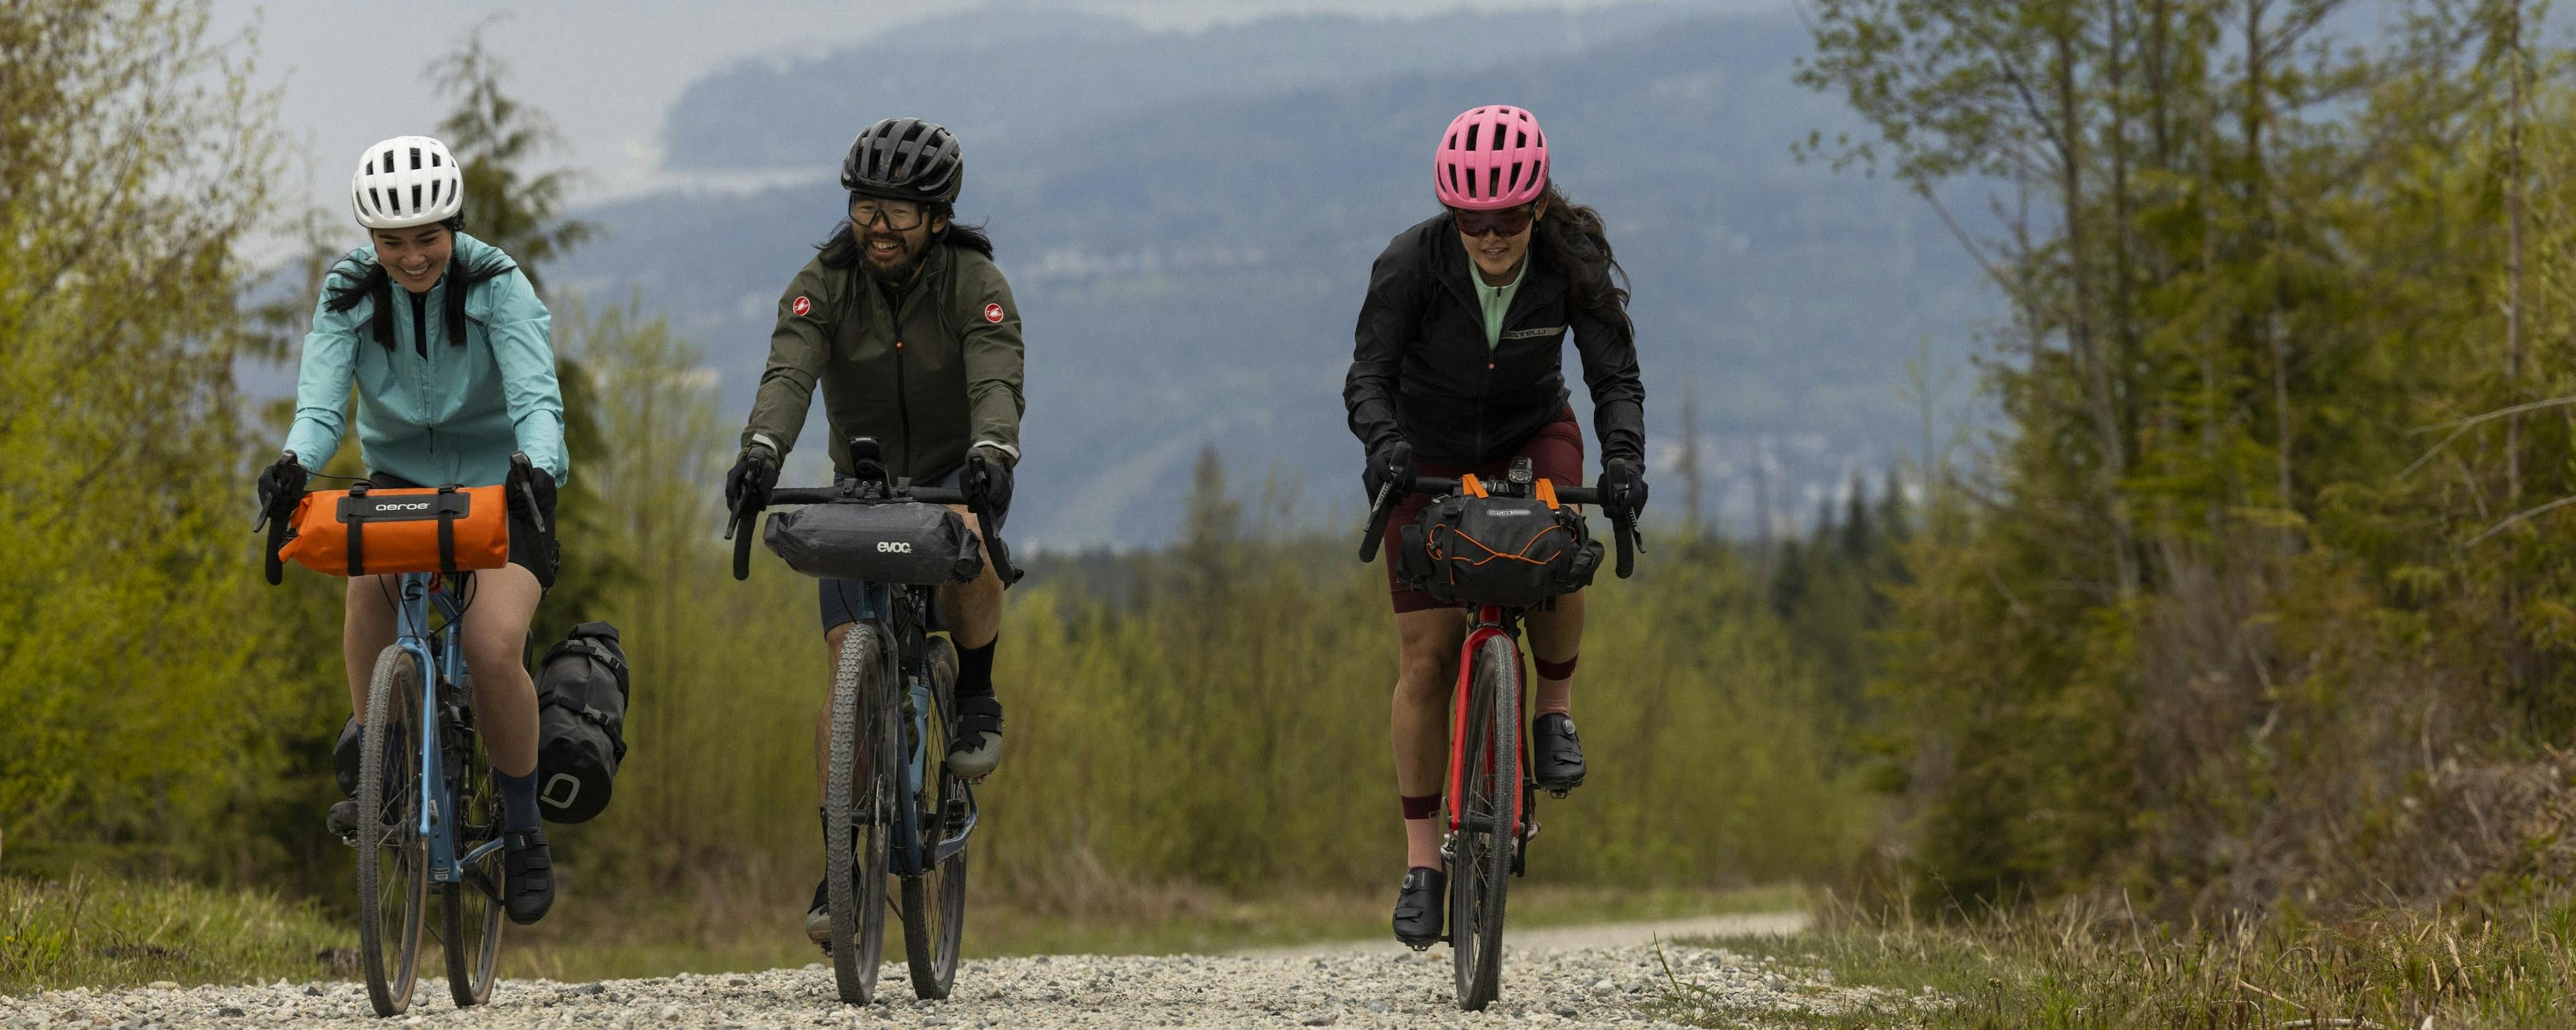 Three riders on a bikepacking trip with loaded bikes on a gravel road